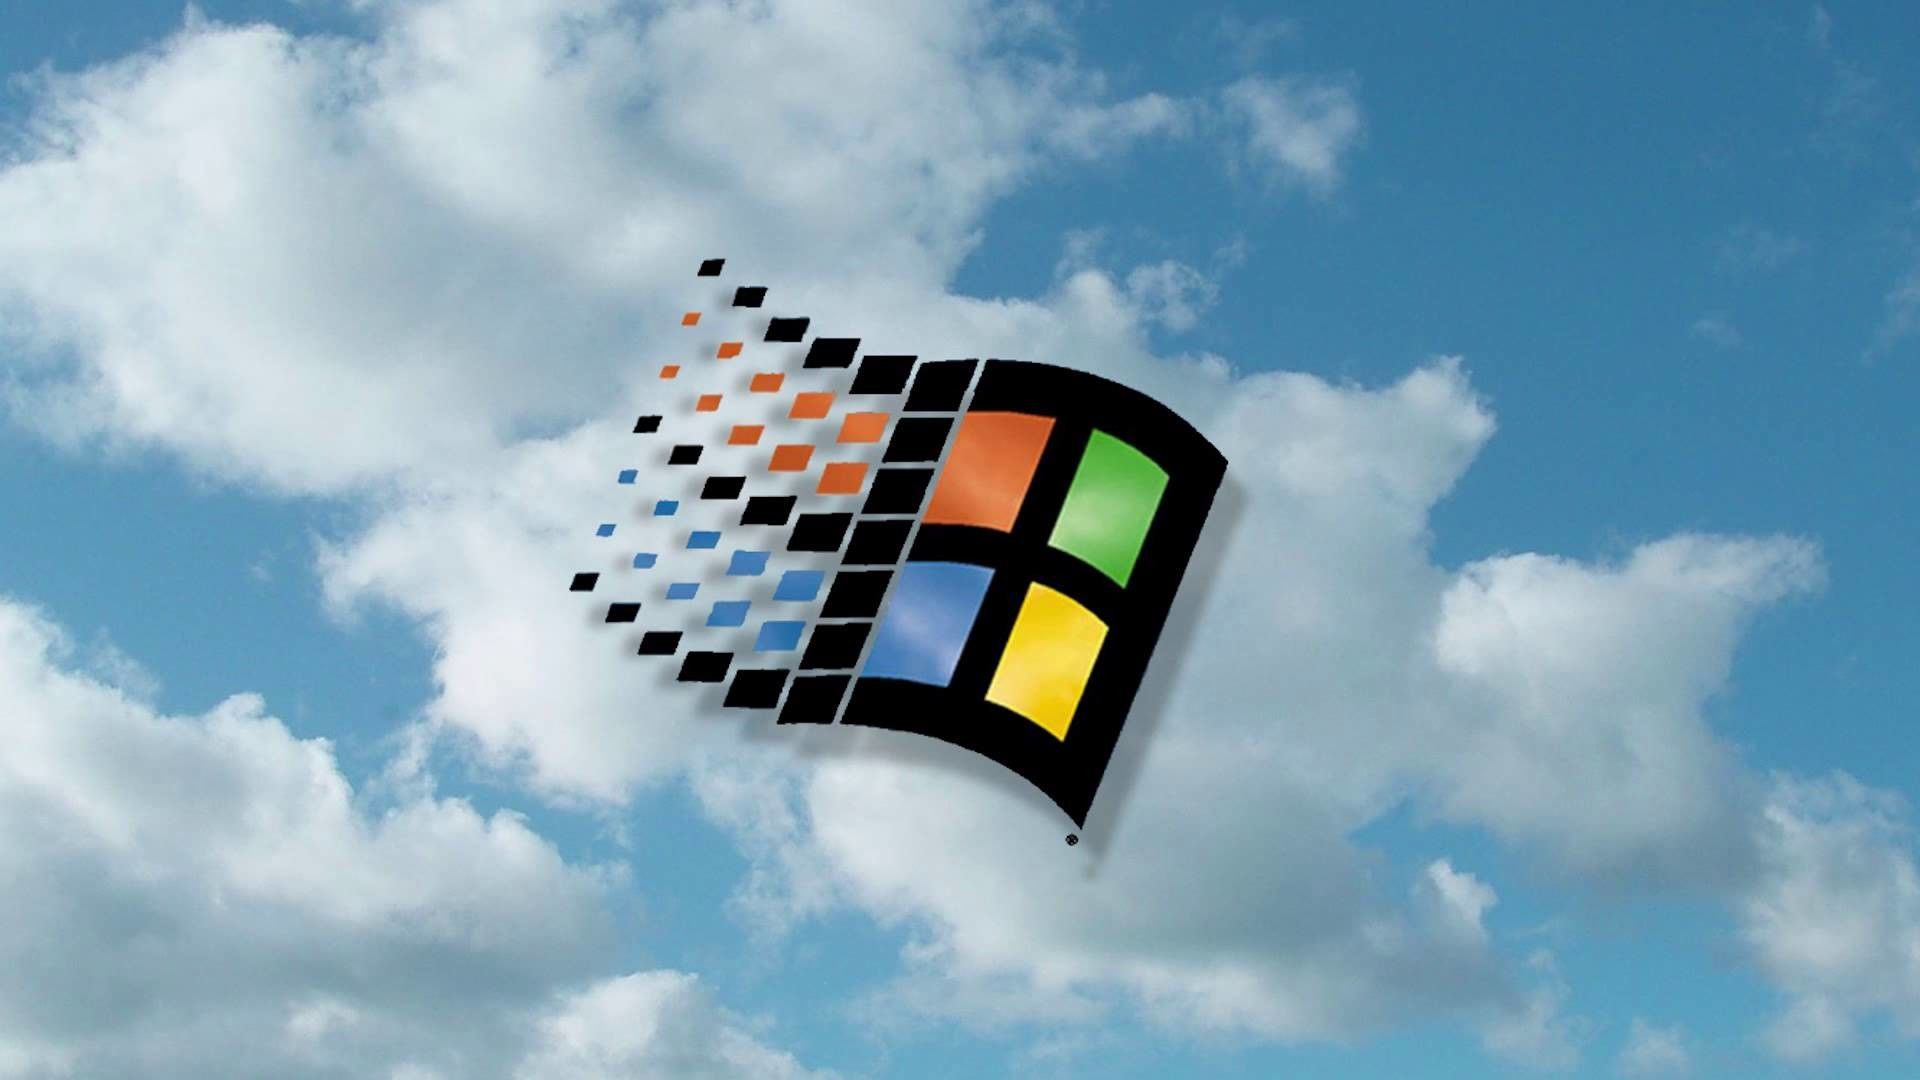 Windows 95 wallpaper with the logo in the sky - Windows 95